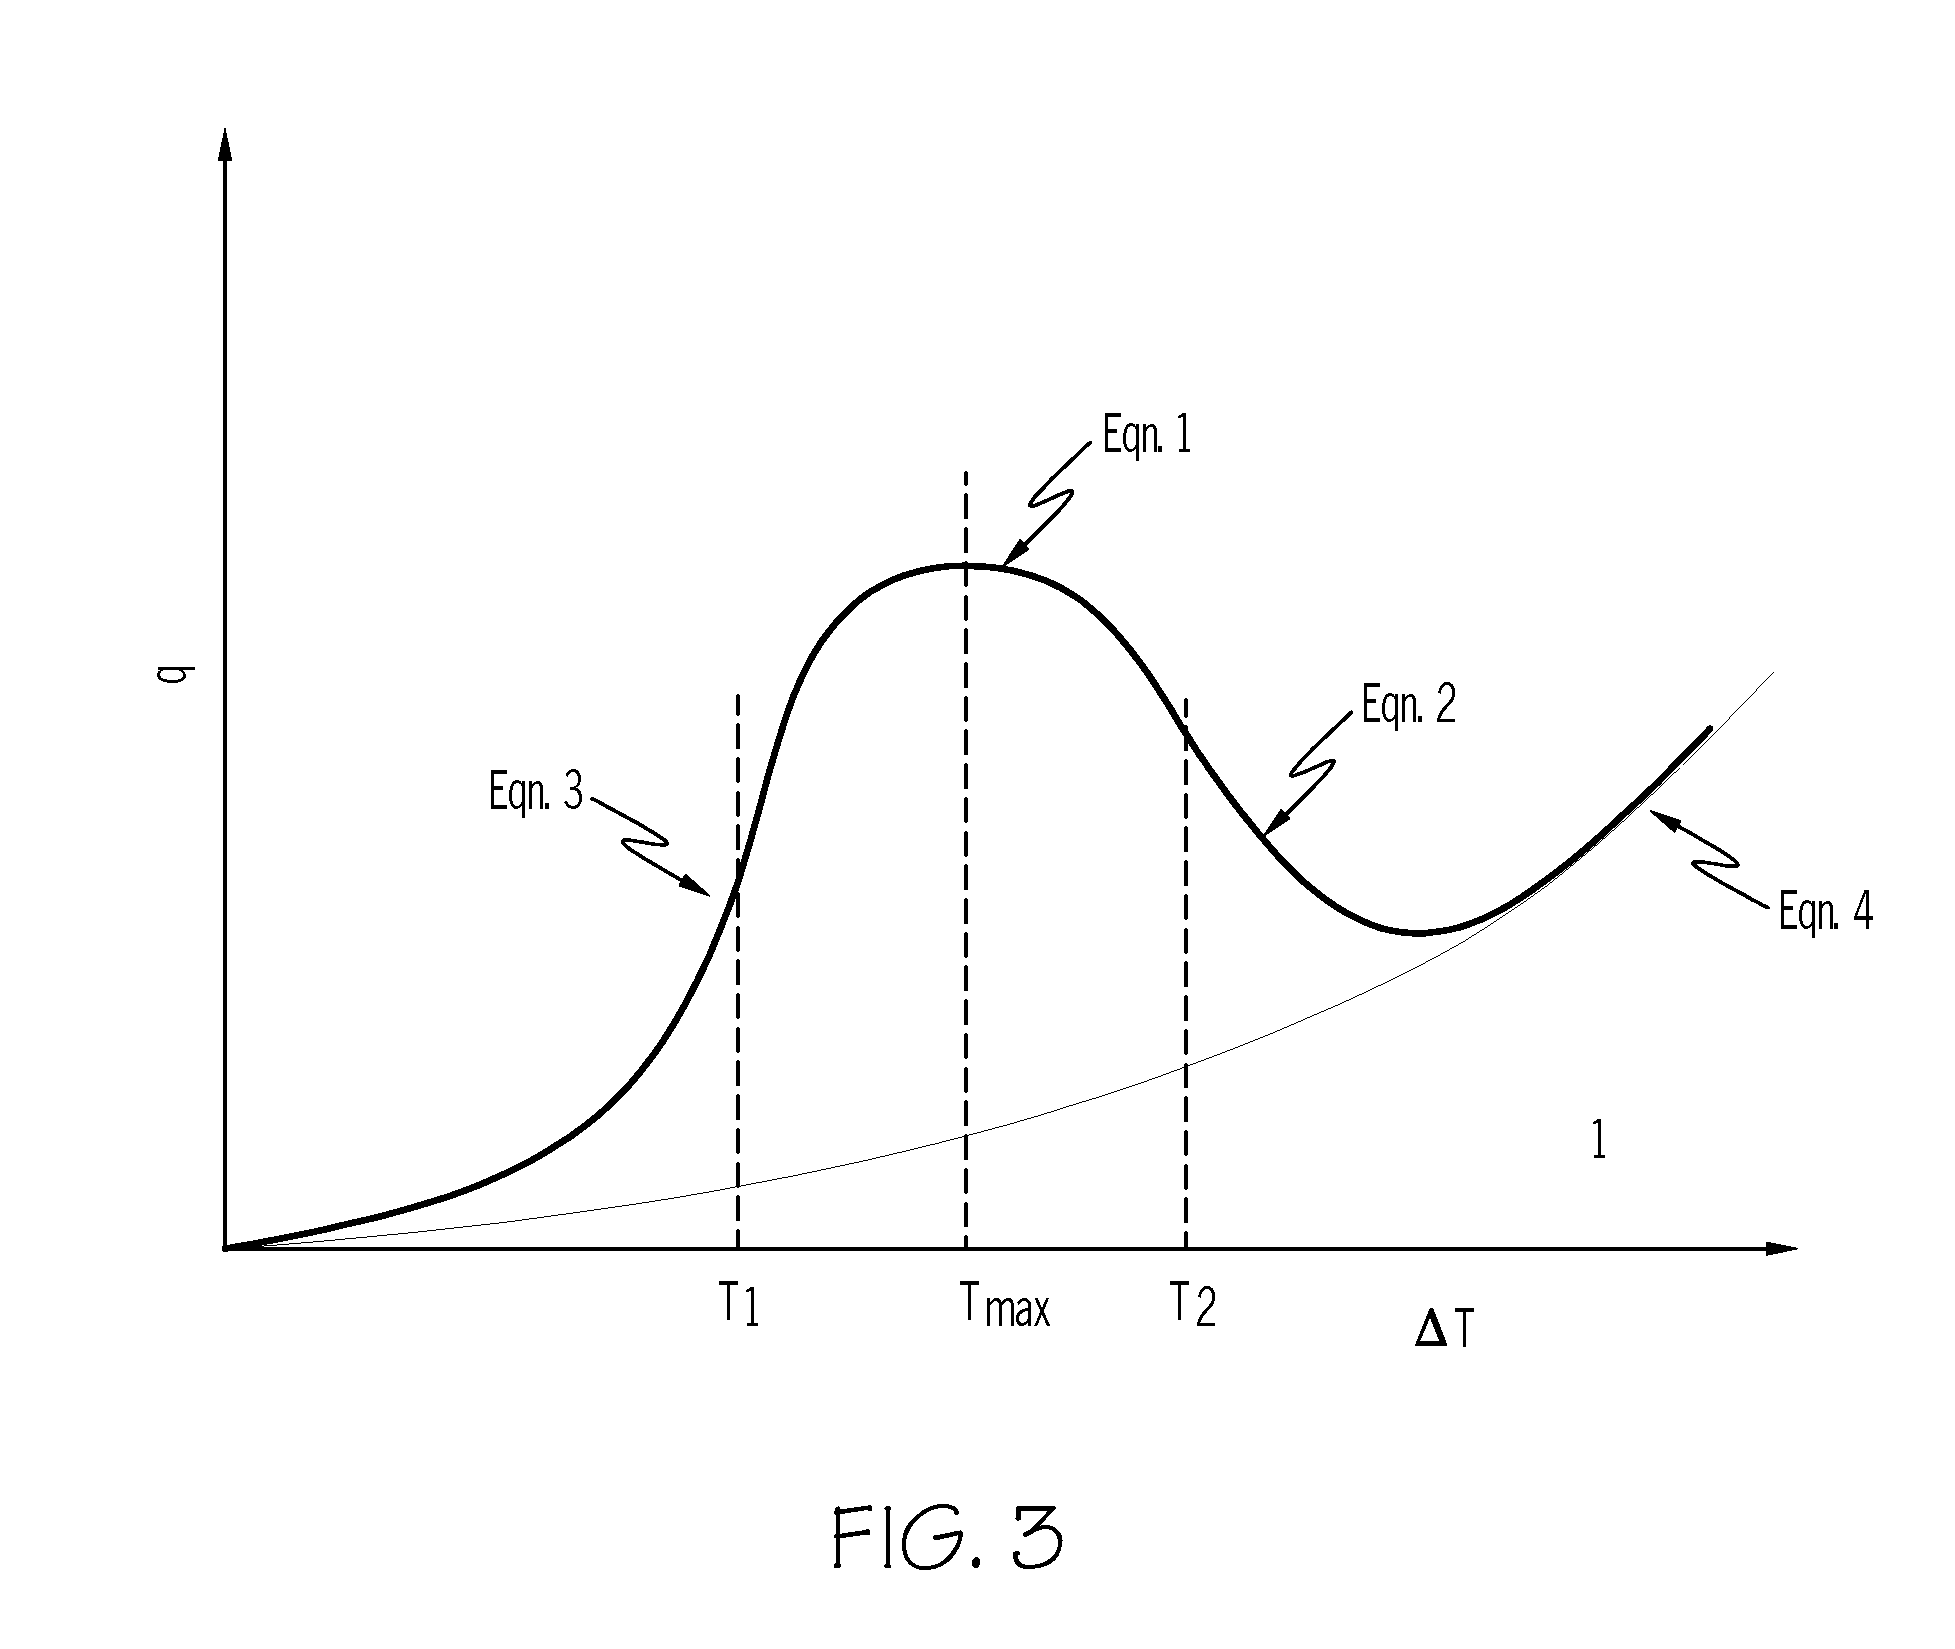 Method for simulating transient heat transfer and temperature distribution of aluminum castings during water quenching